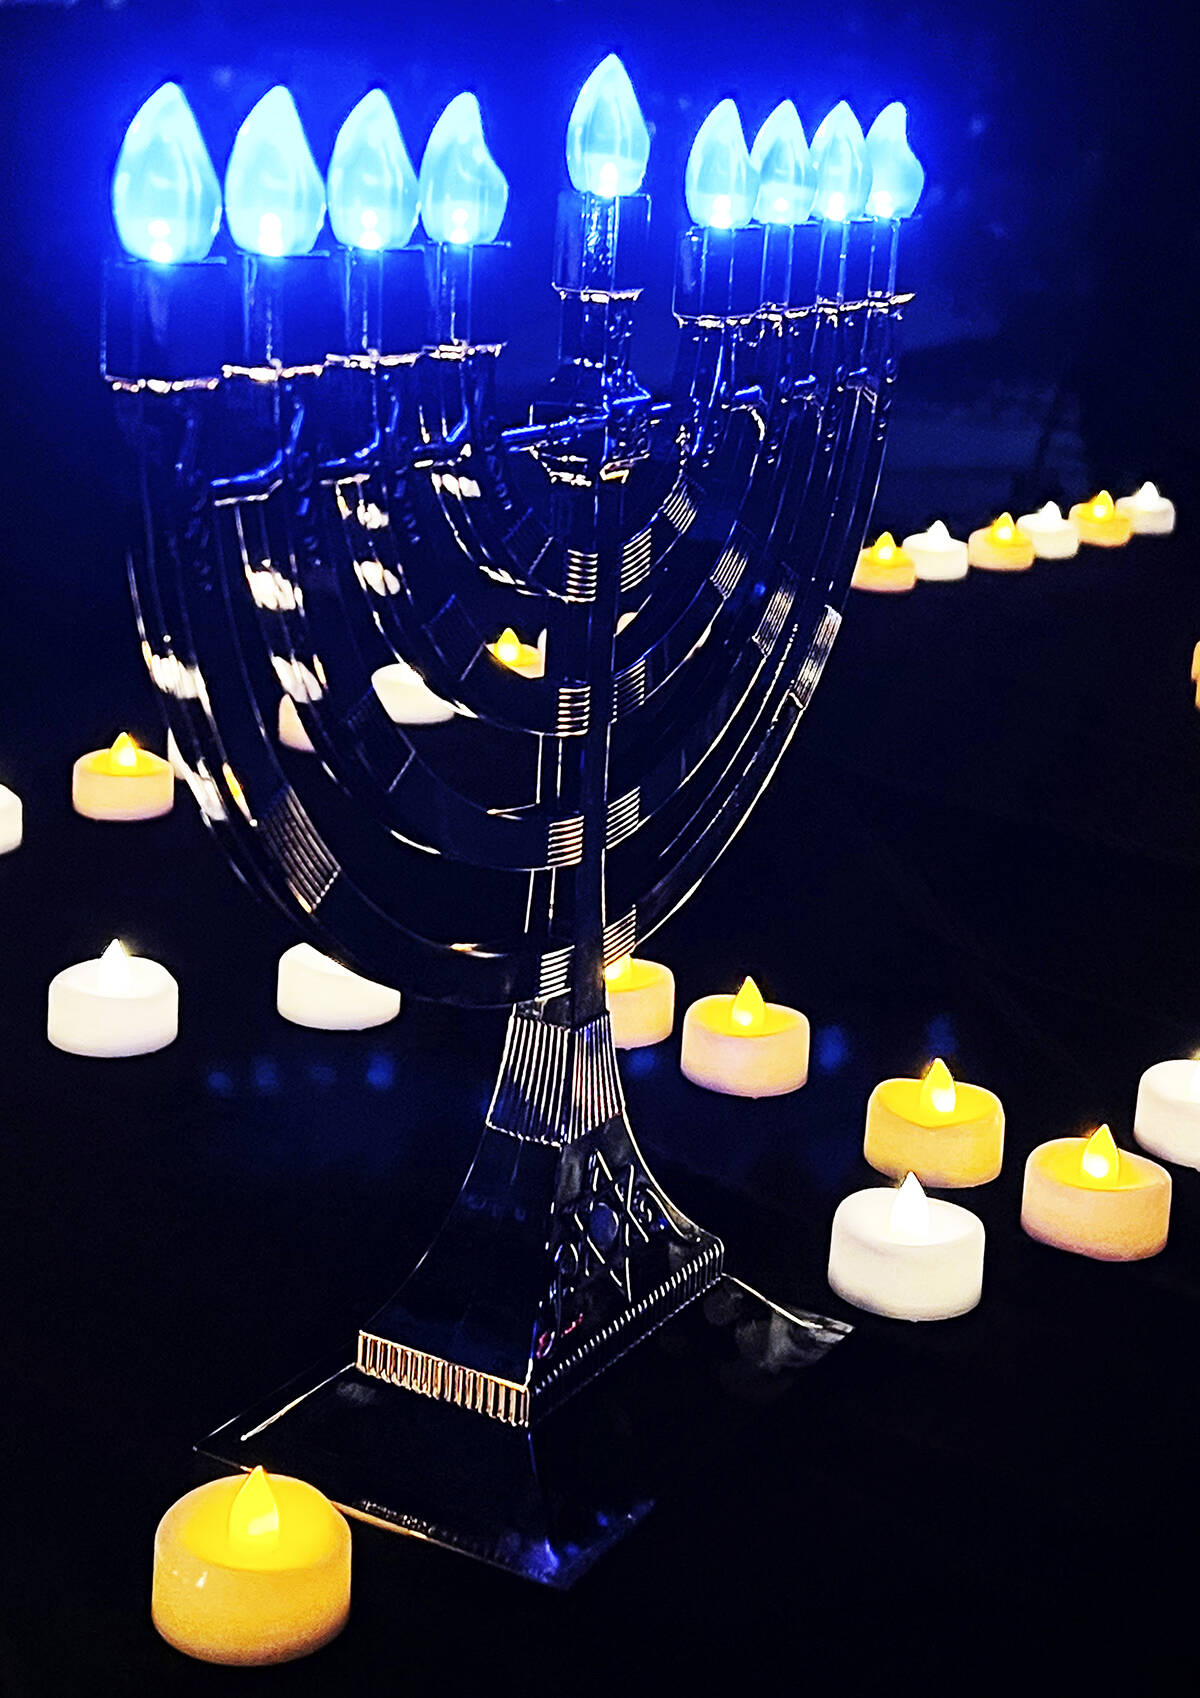 A menorah surrounded by candles honors the Jewish faith.